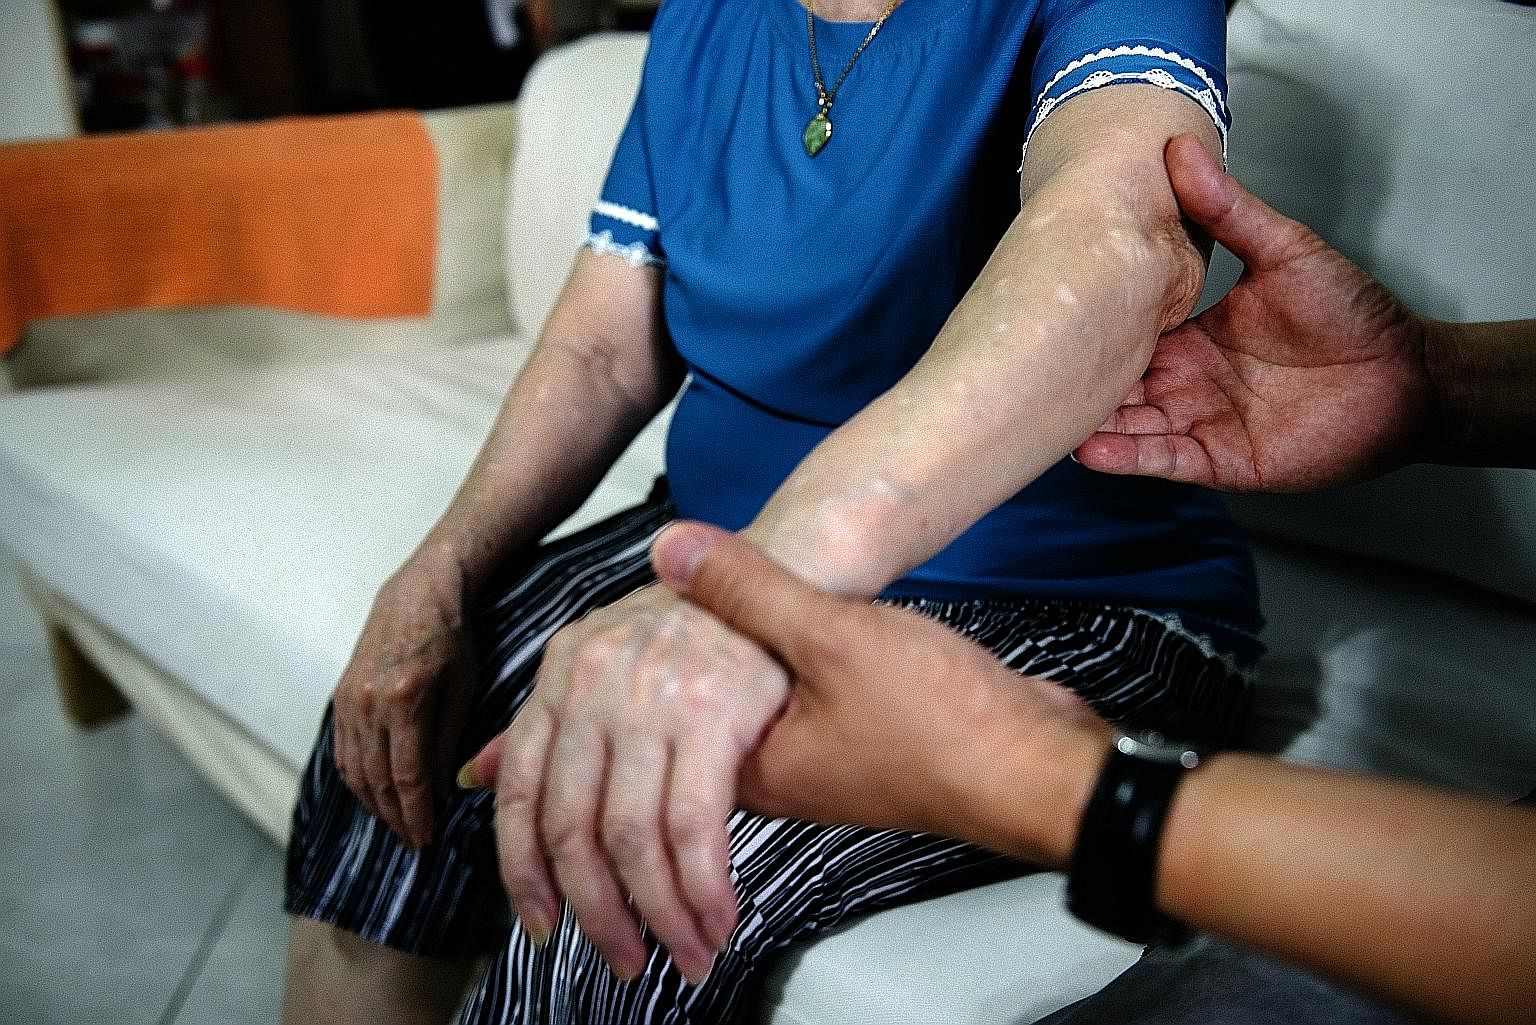 Mr Chua Juay Peng showing the marks on his mother Low Meow Luan's arms that came from her burning herself with joss sticks. It was her way to get rid of the "insects" she believed were roaming freely on her body. With treatment, Madam Low has improve